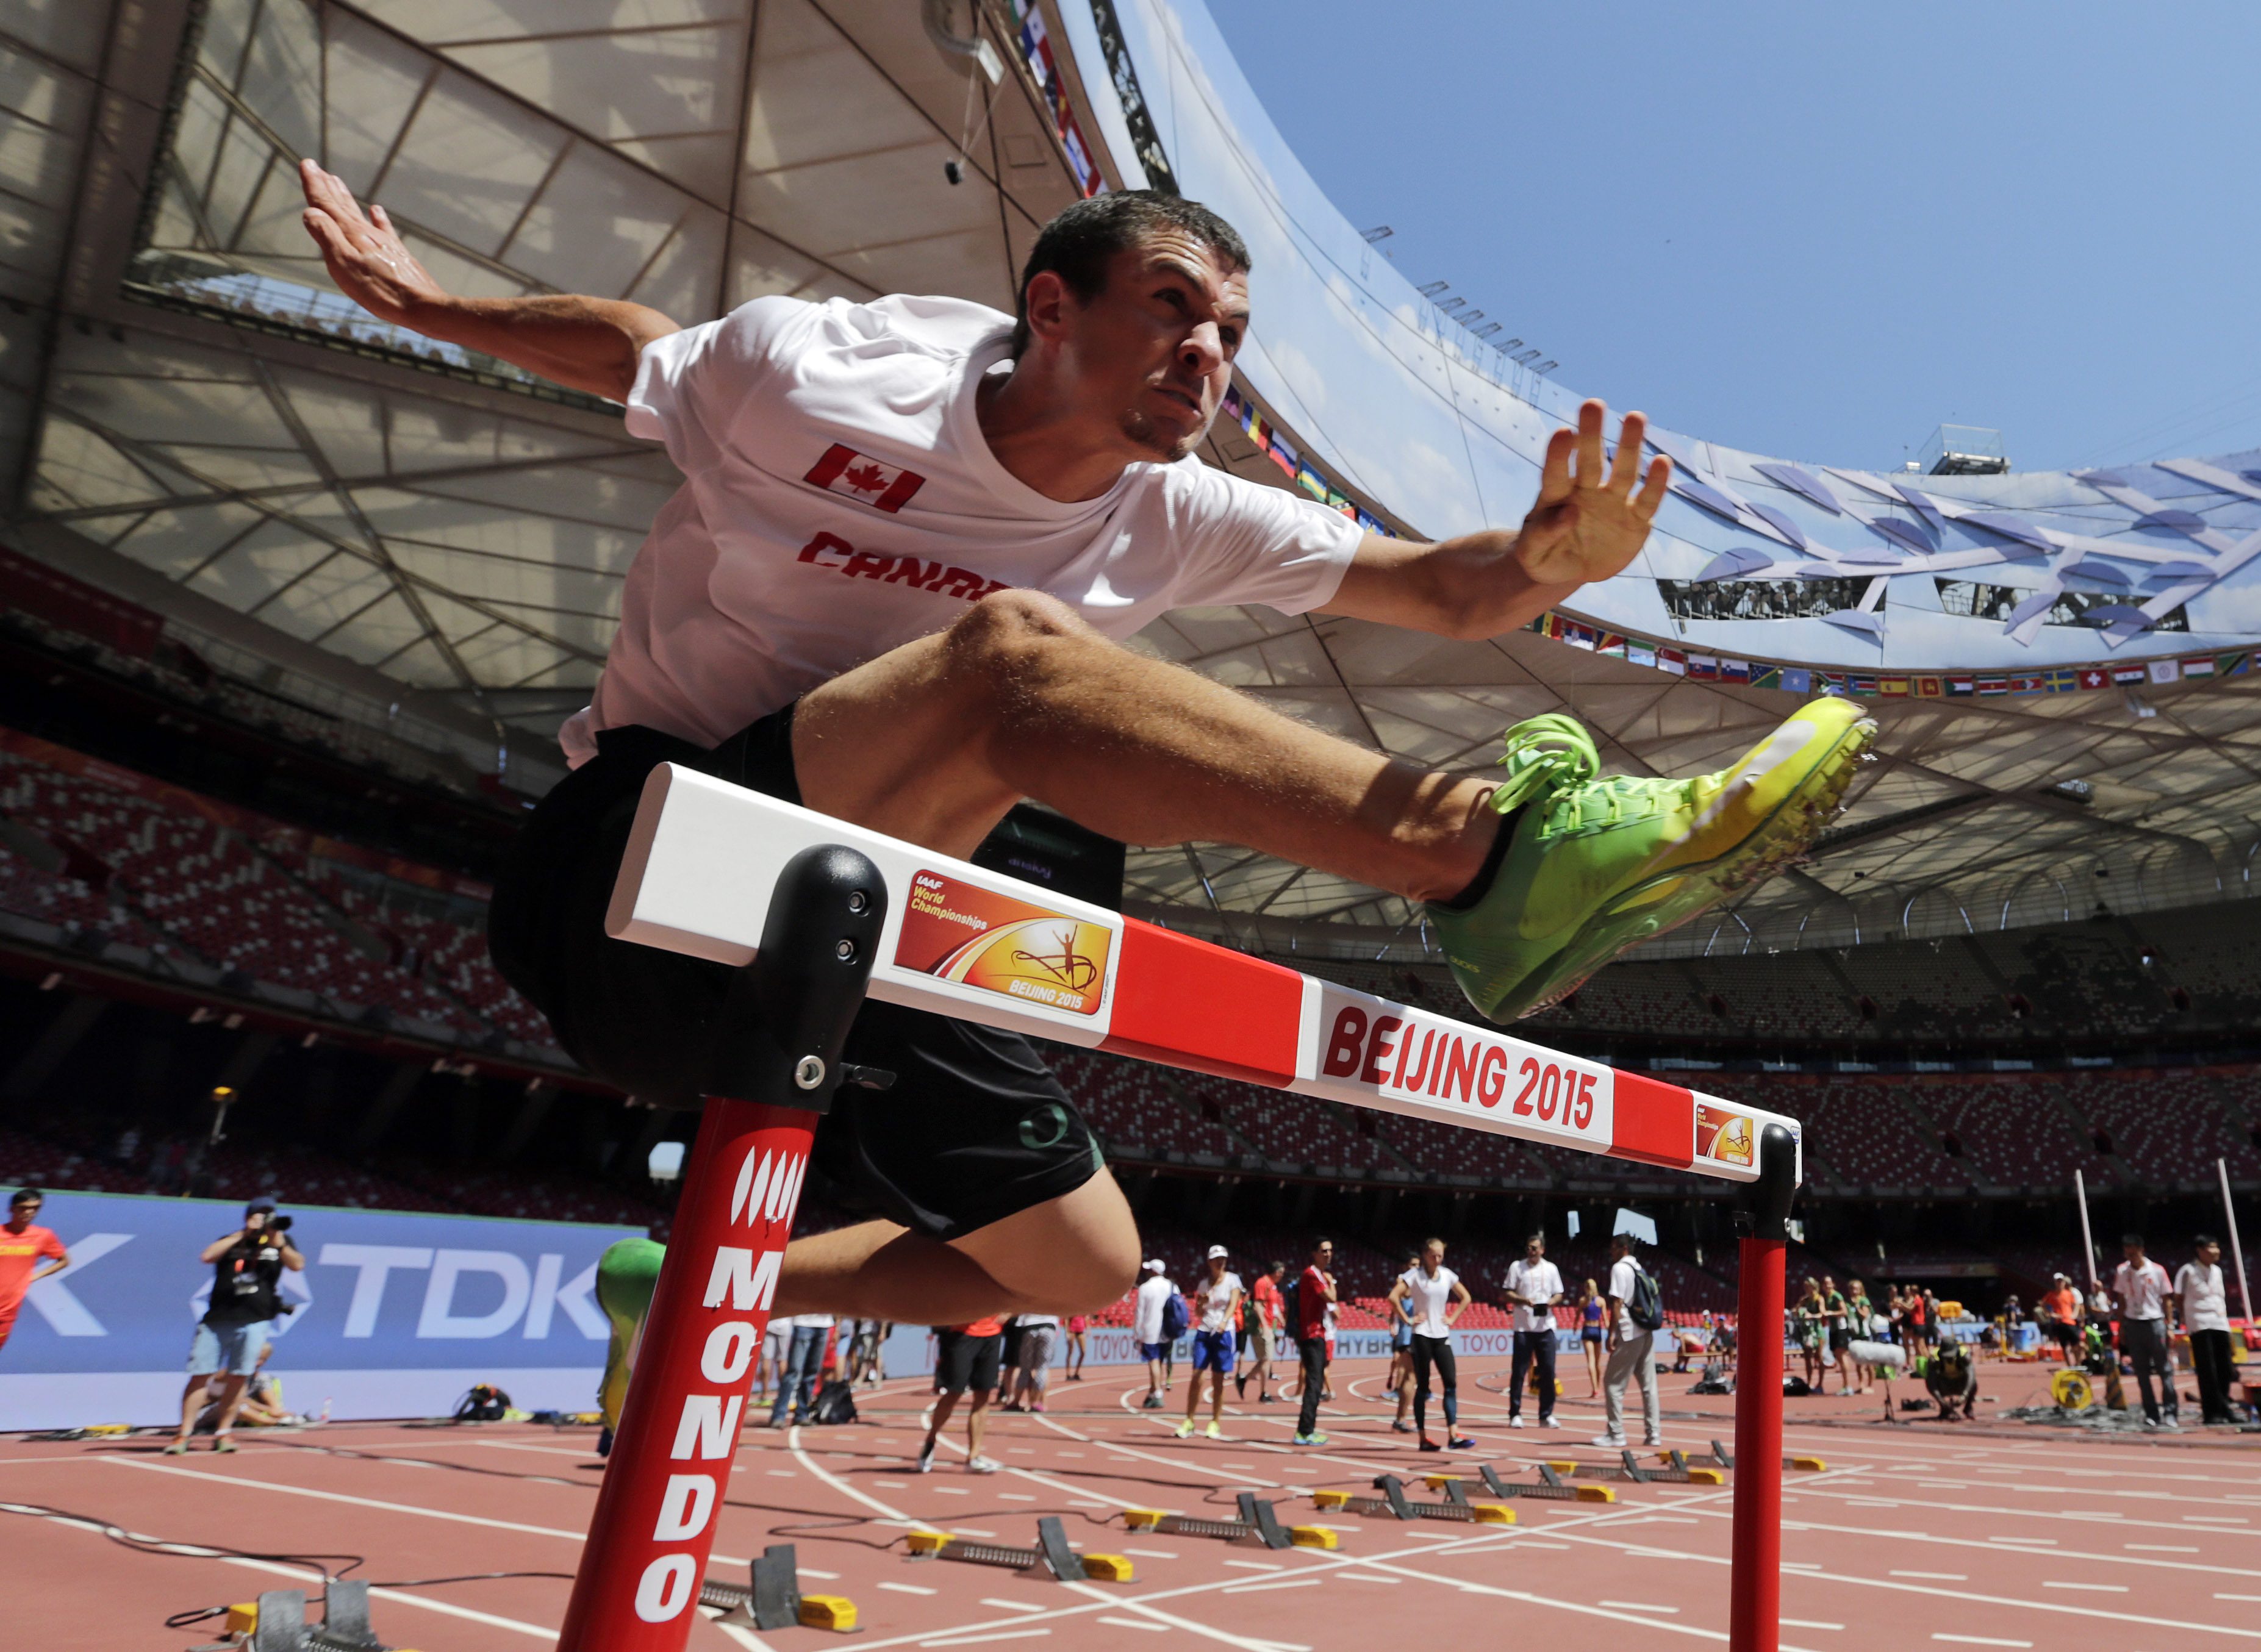 Canada's Johnathan Cabral clears a hurdle during a training session before the World Athletic Championships at the Bird's Nest stadium in Beijing, Friday, Aug. 21, 2015. (AP Photo/Andy Wong)